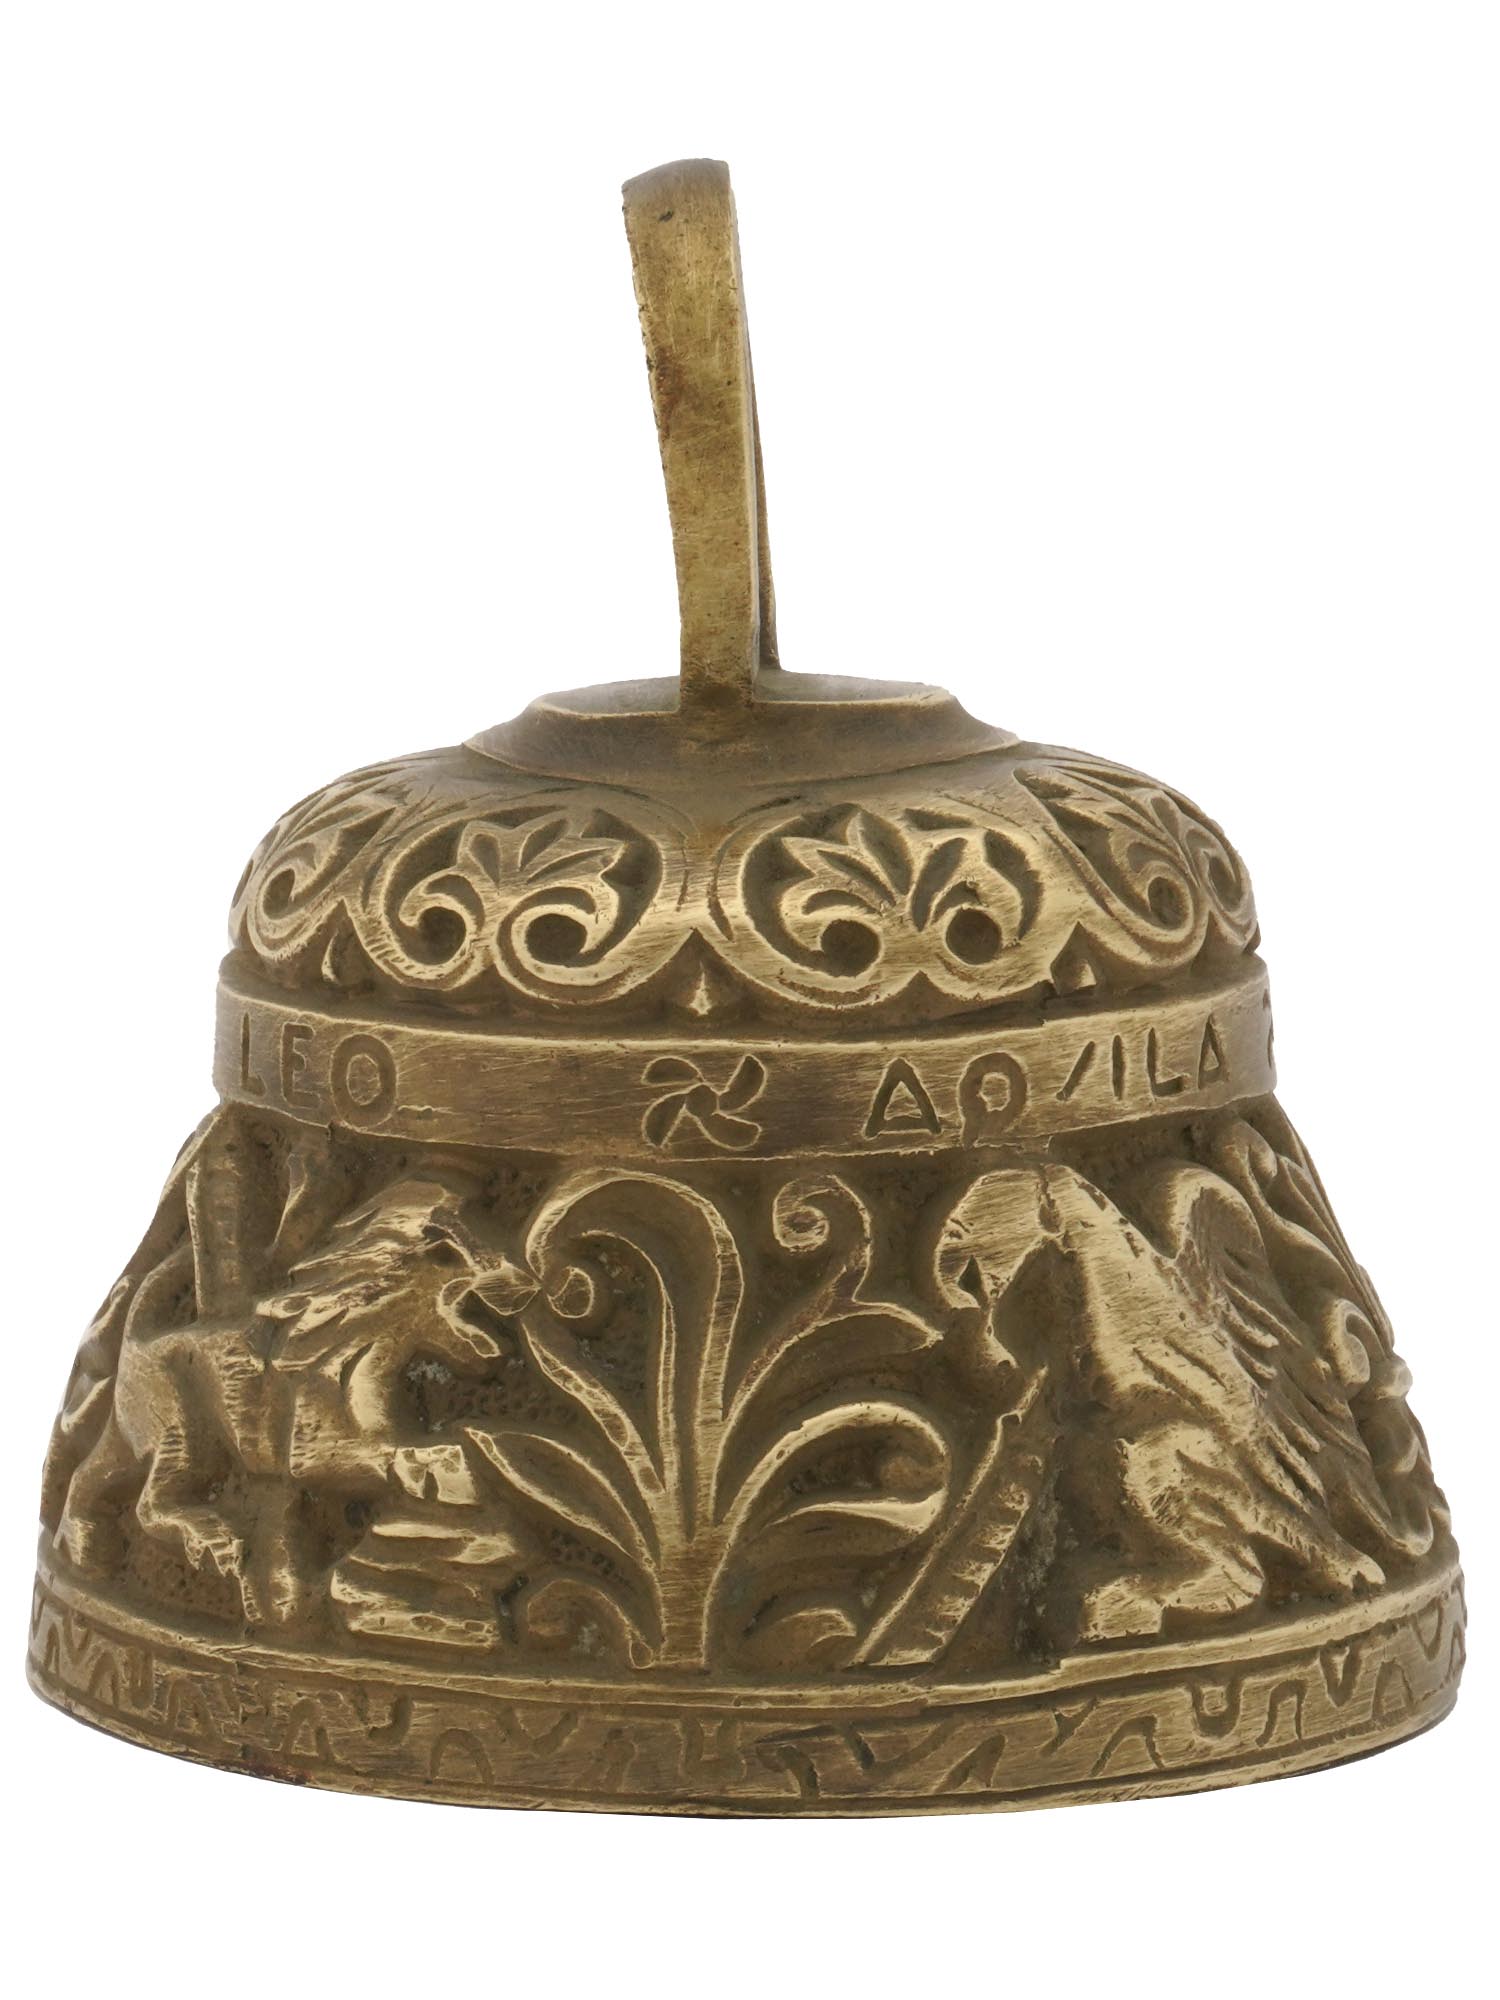 CAST BRONZE CHURCH HAND BELL WITH ANIMAL RELIEF PIC-3